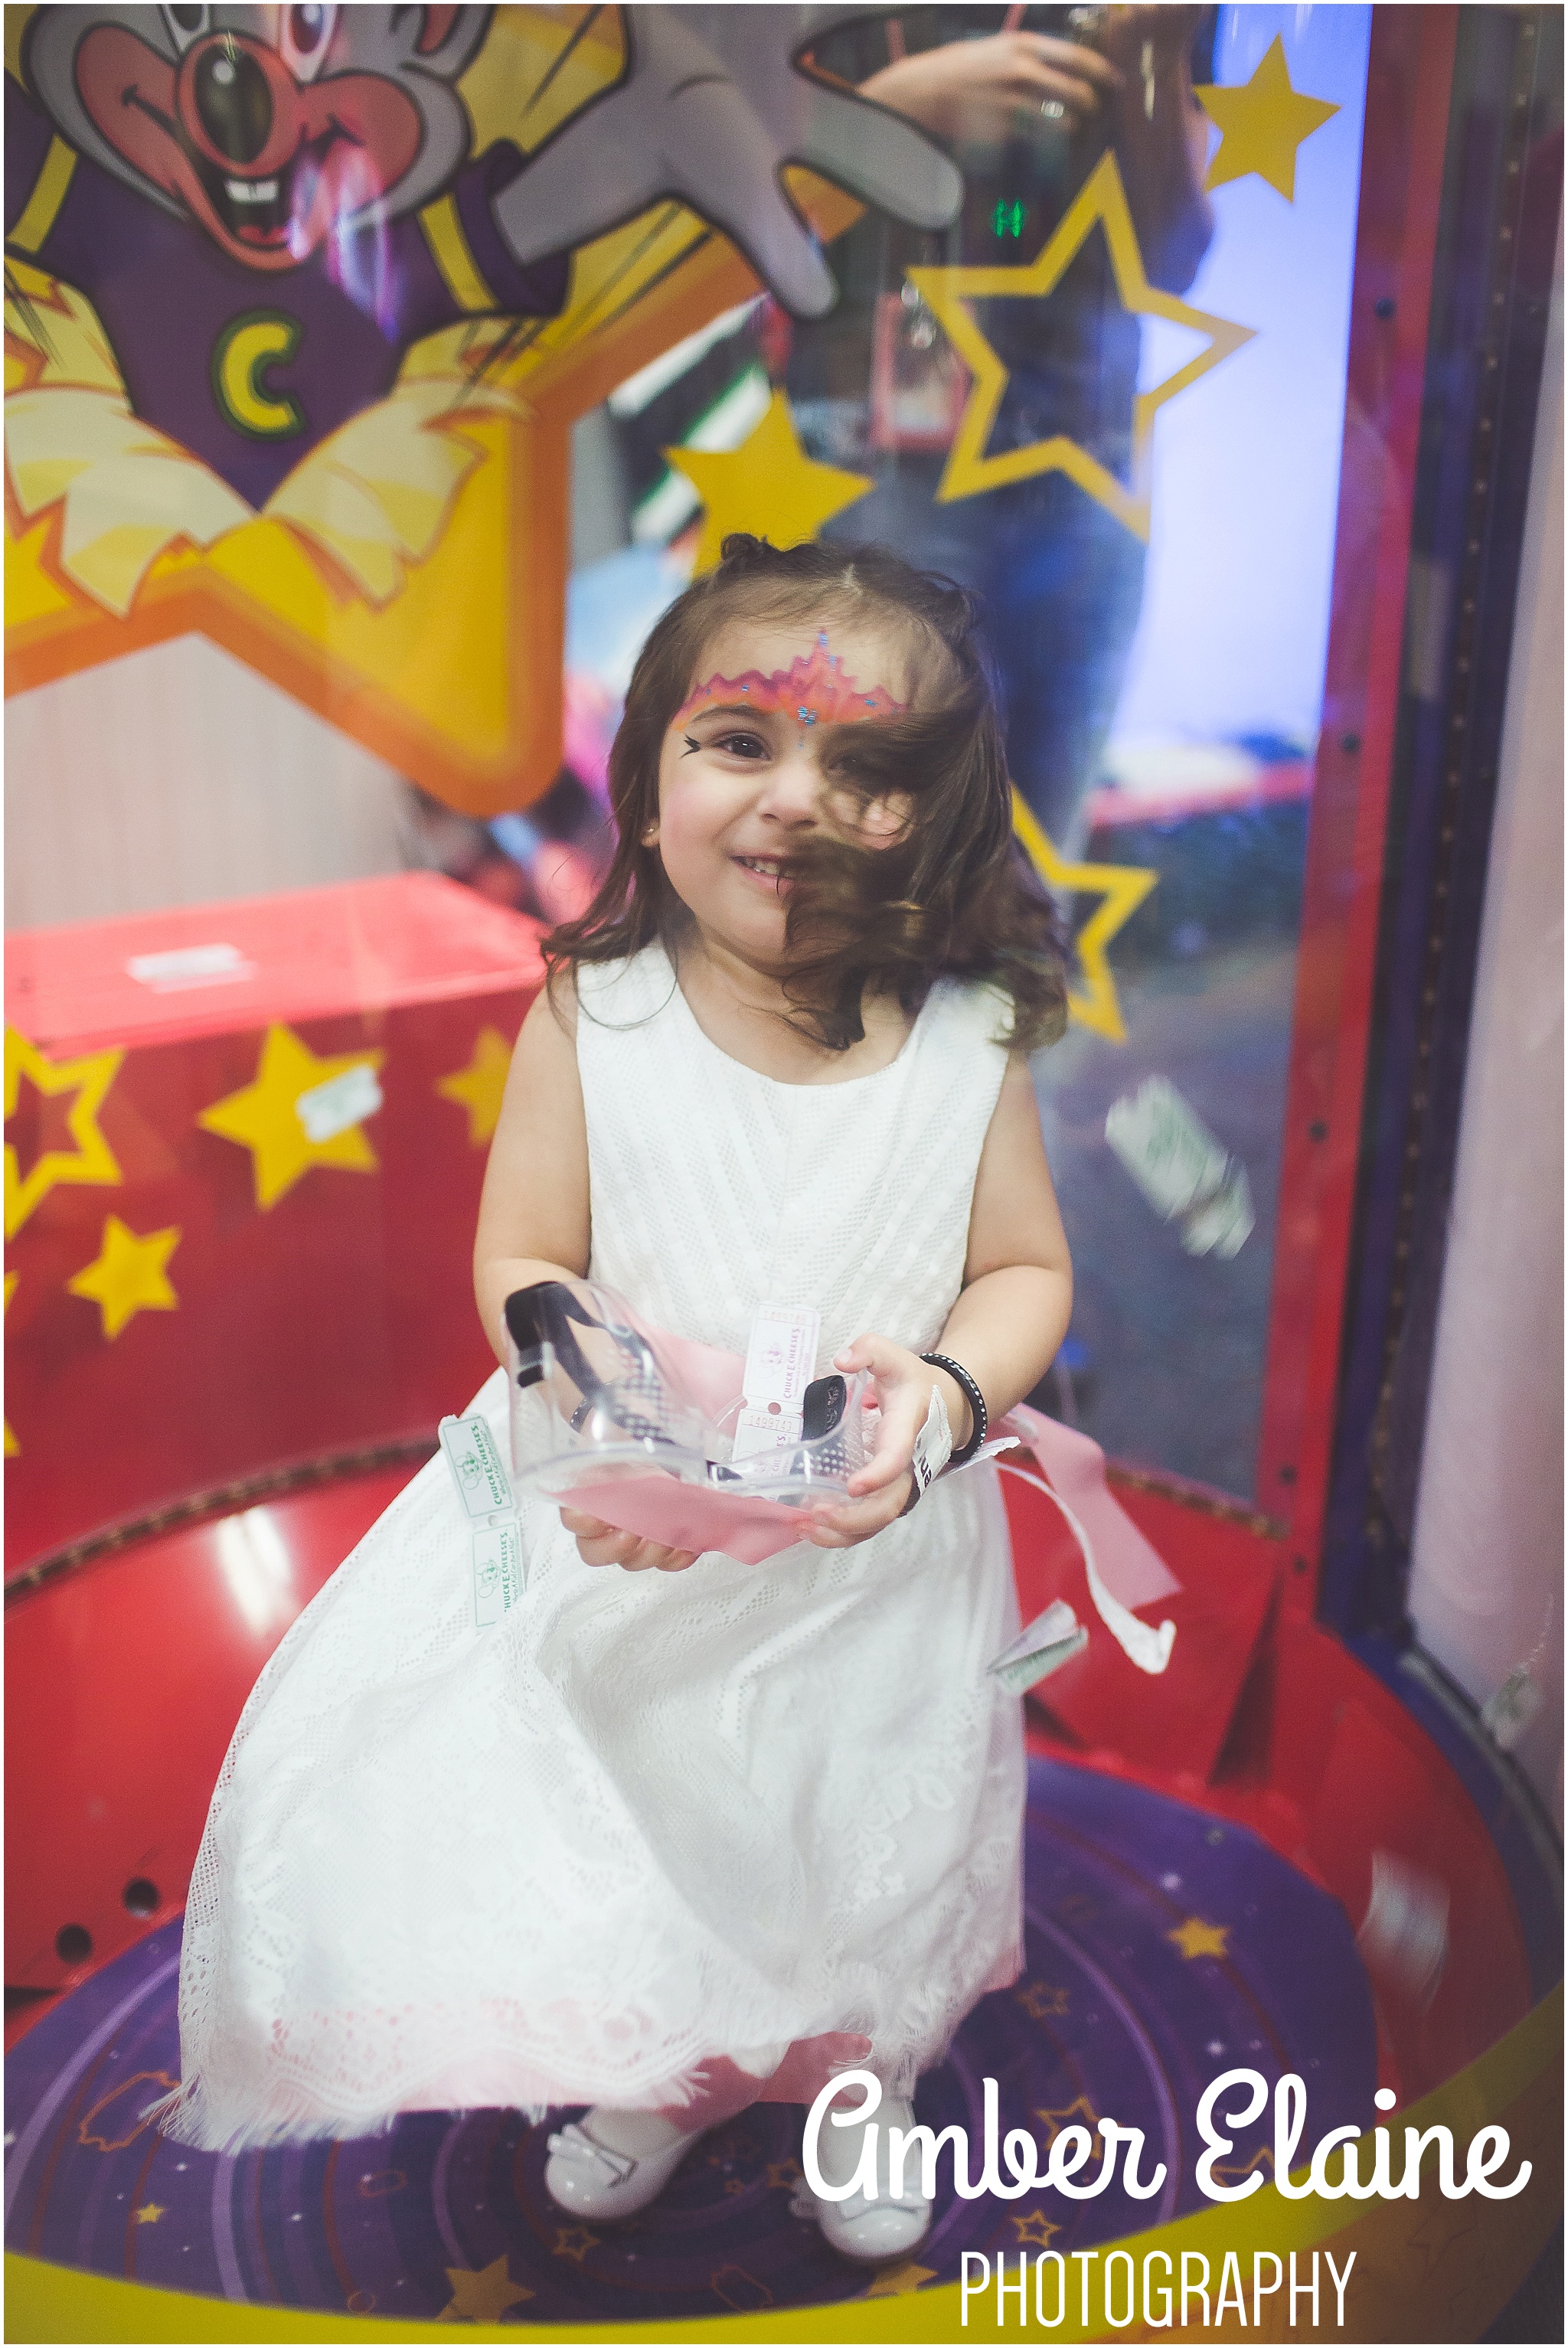 lifestyle birthday photography for girl toddler with face painting and games